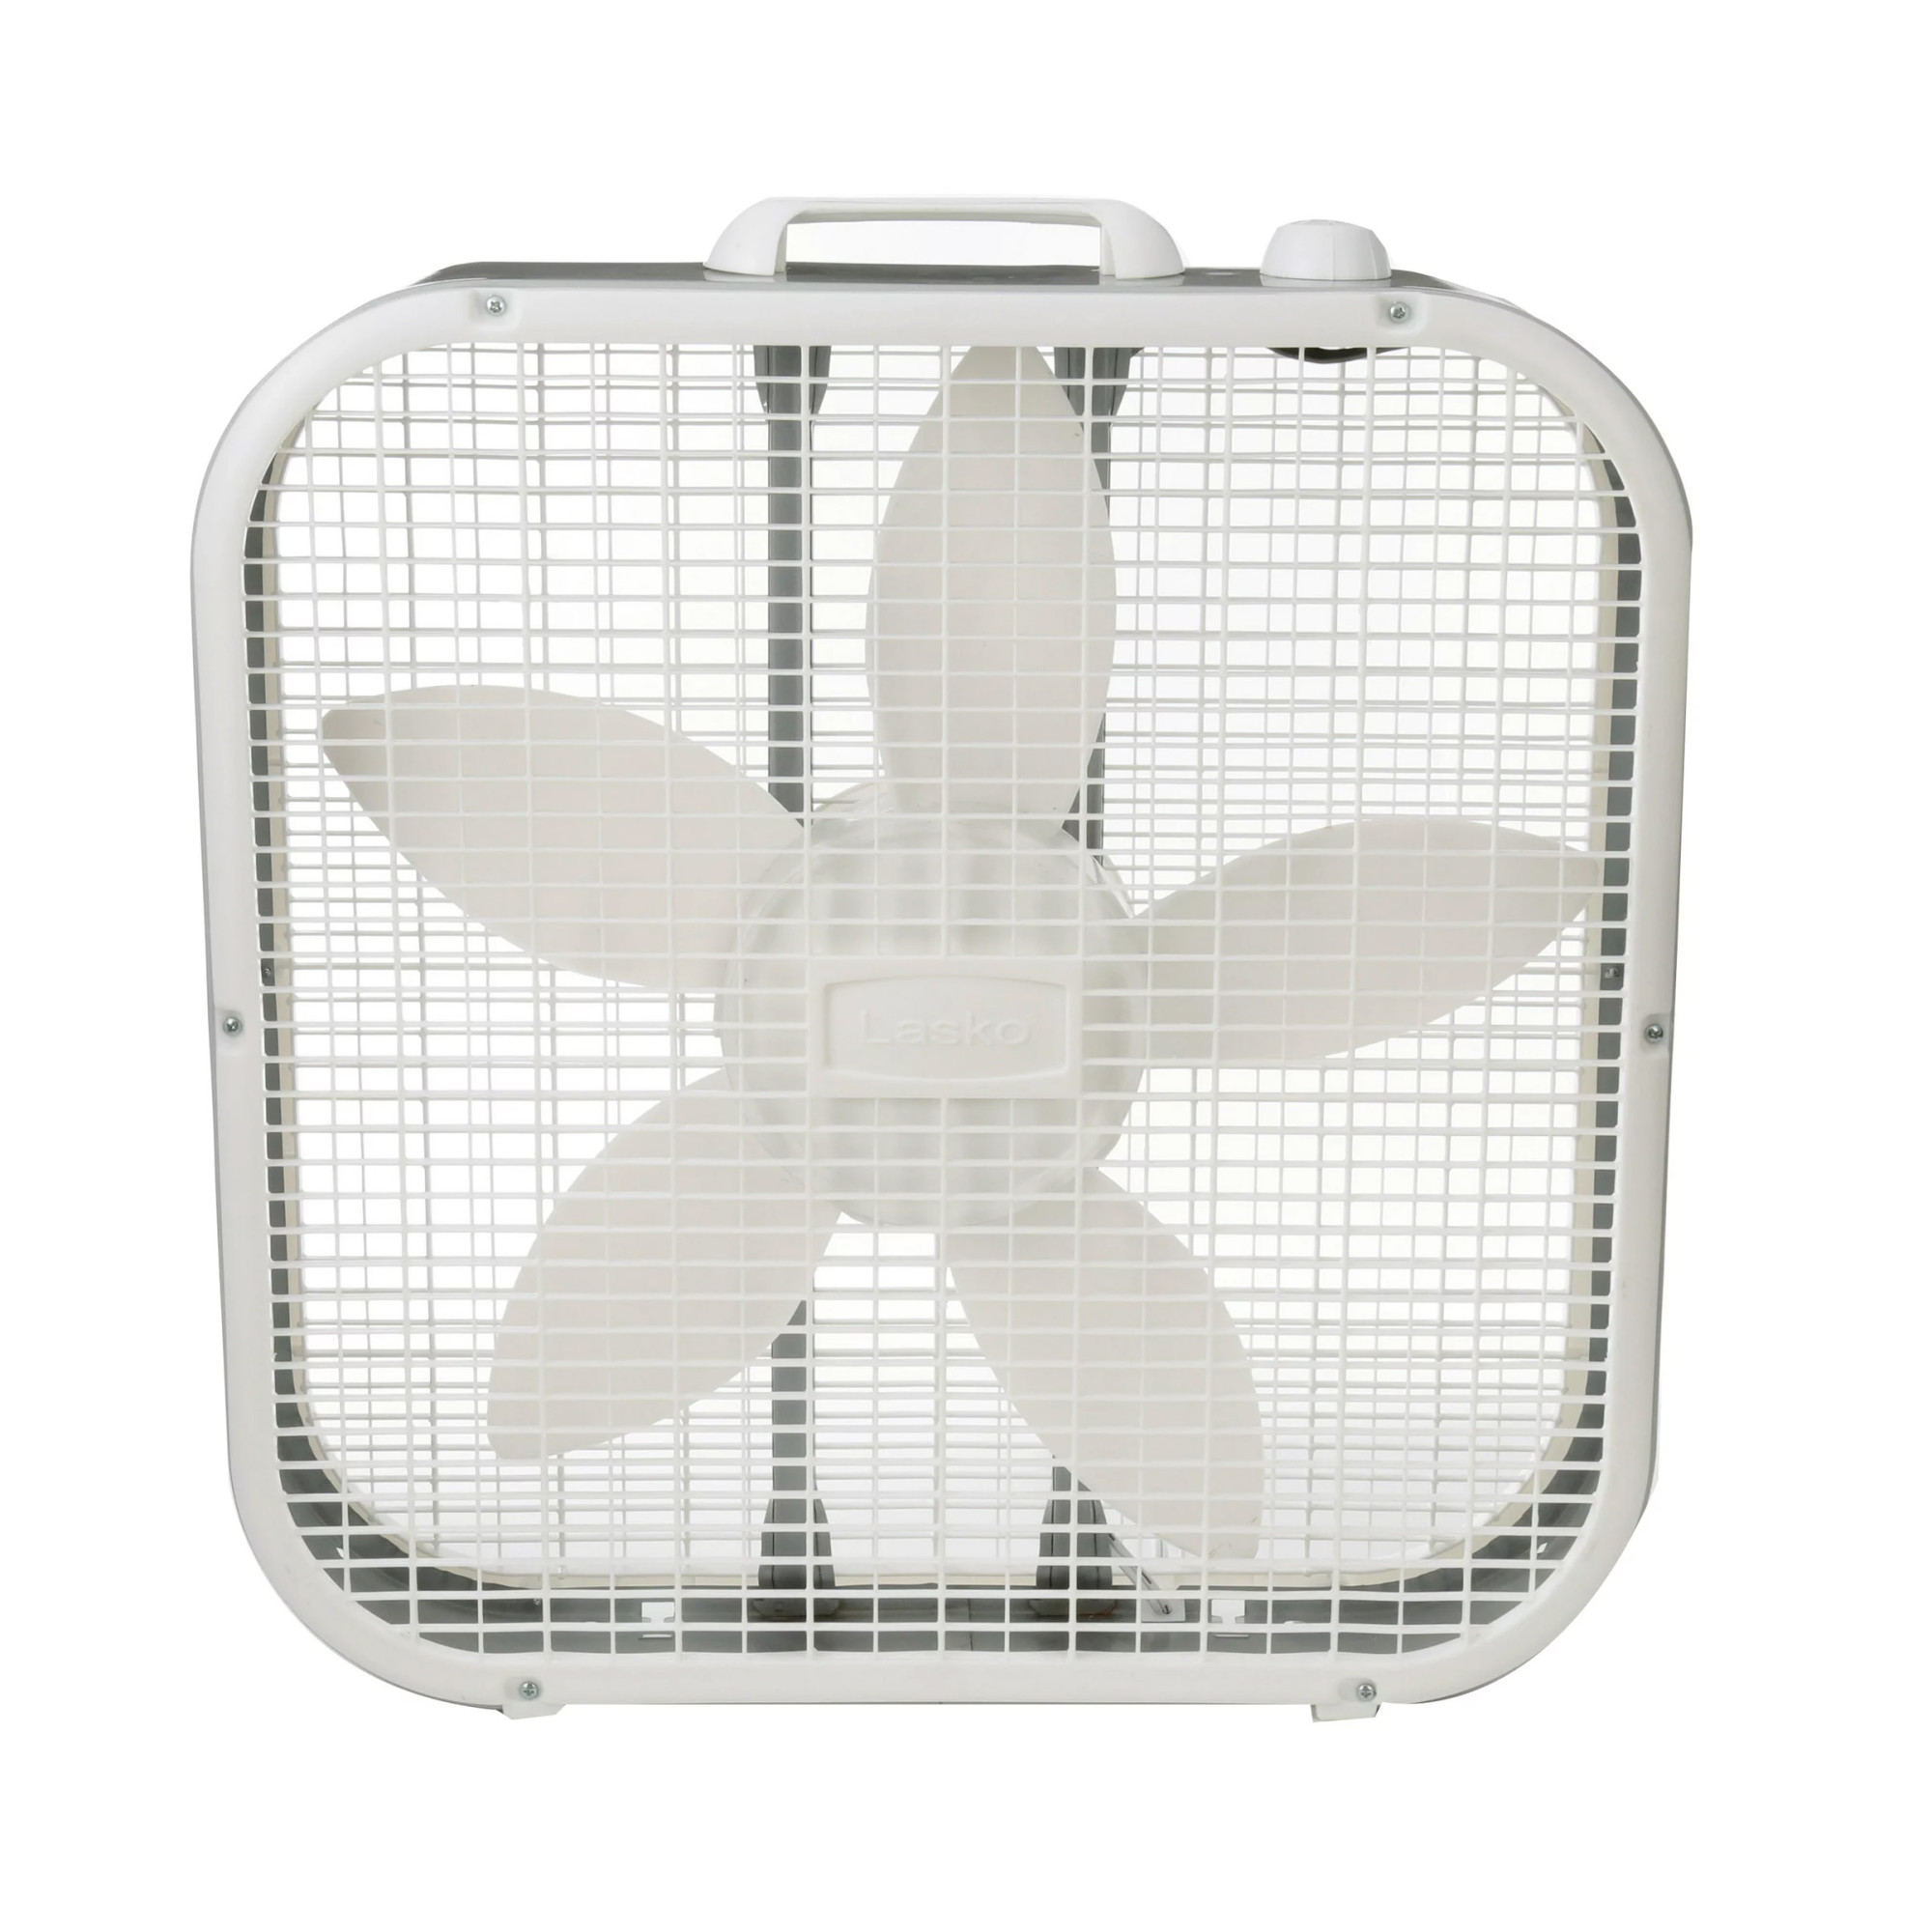 Lasko 20" Classic Box Fan with Weather-Resistant Motor, 3 Speeds, 22.5" H, White, B20200, New - image 2 of 7